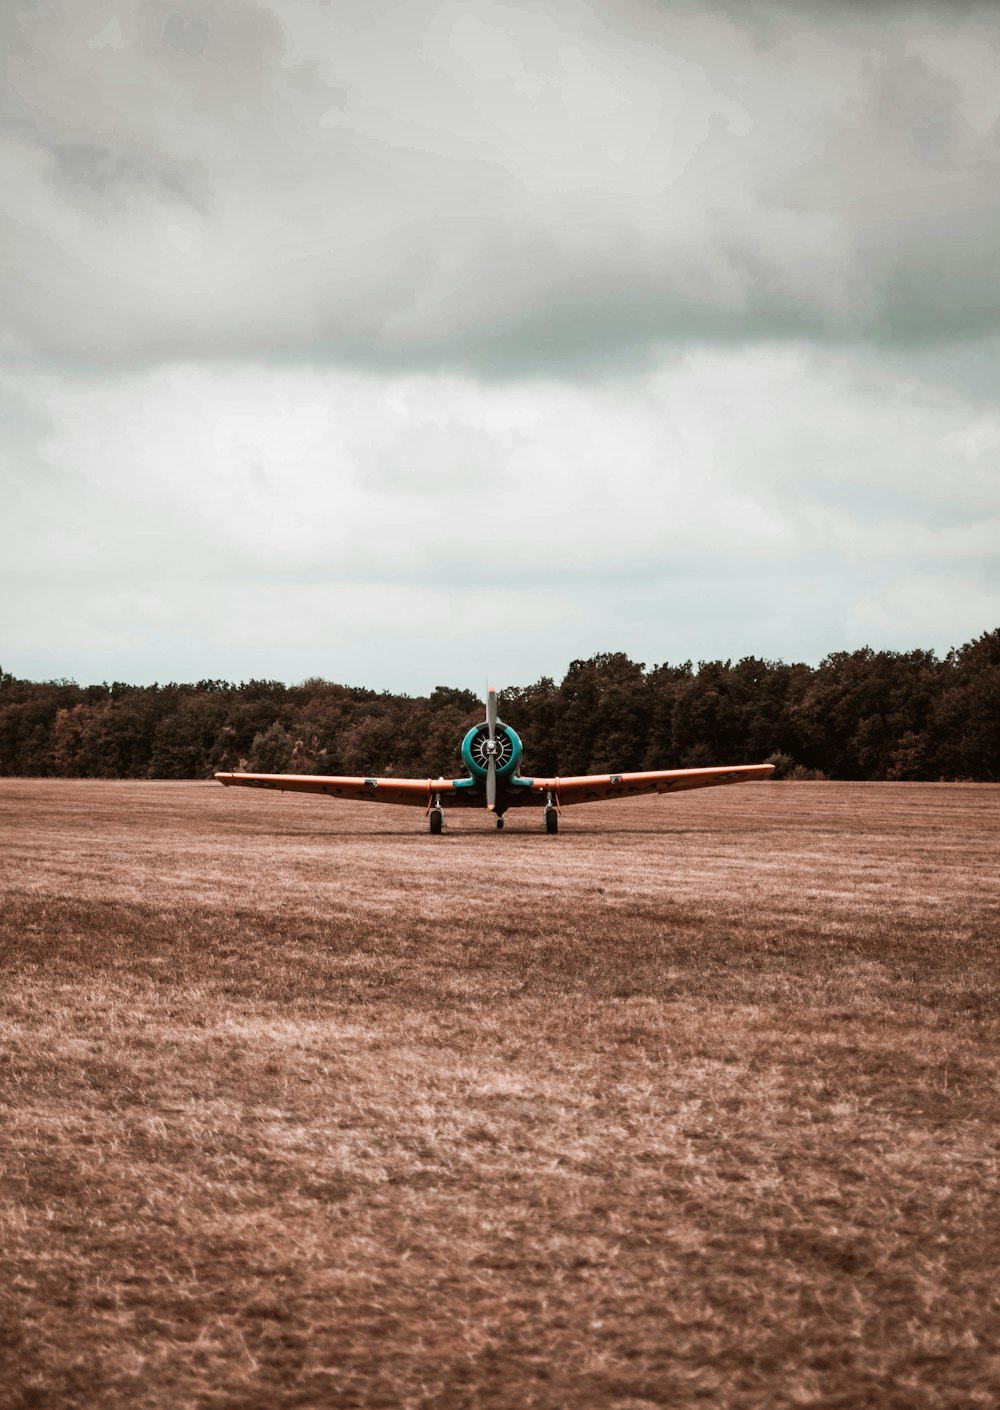 a person sitting on top of an airplane in a field